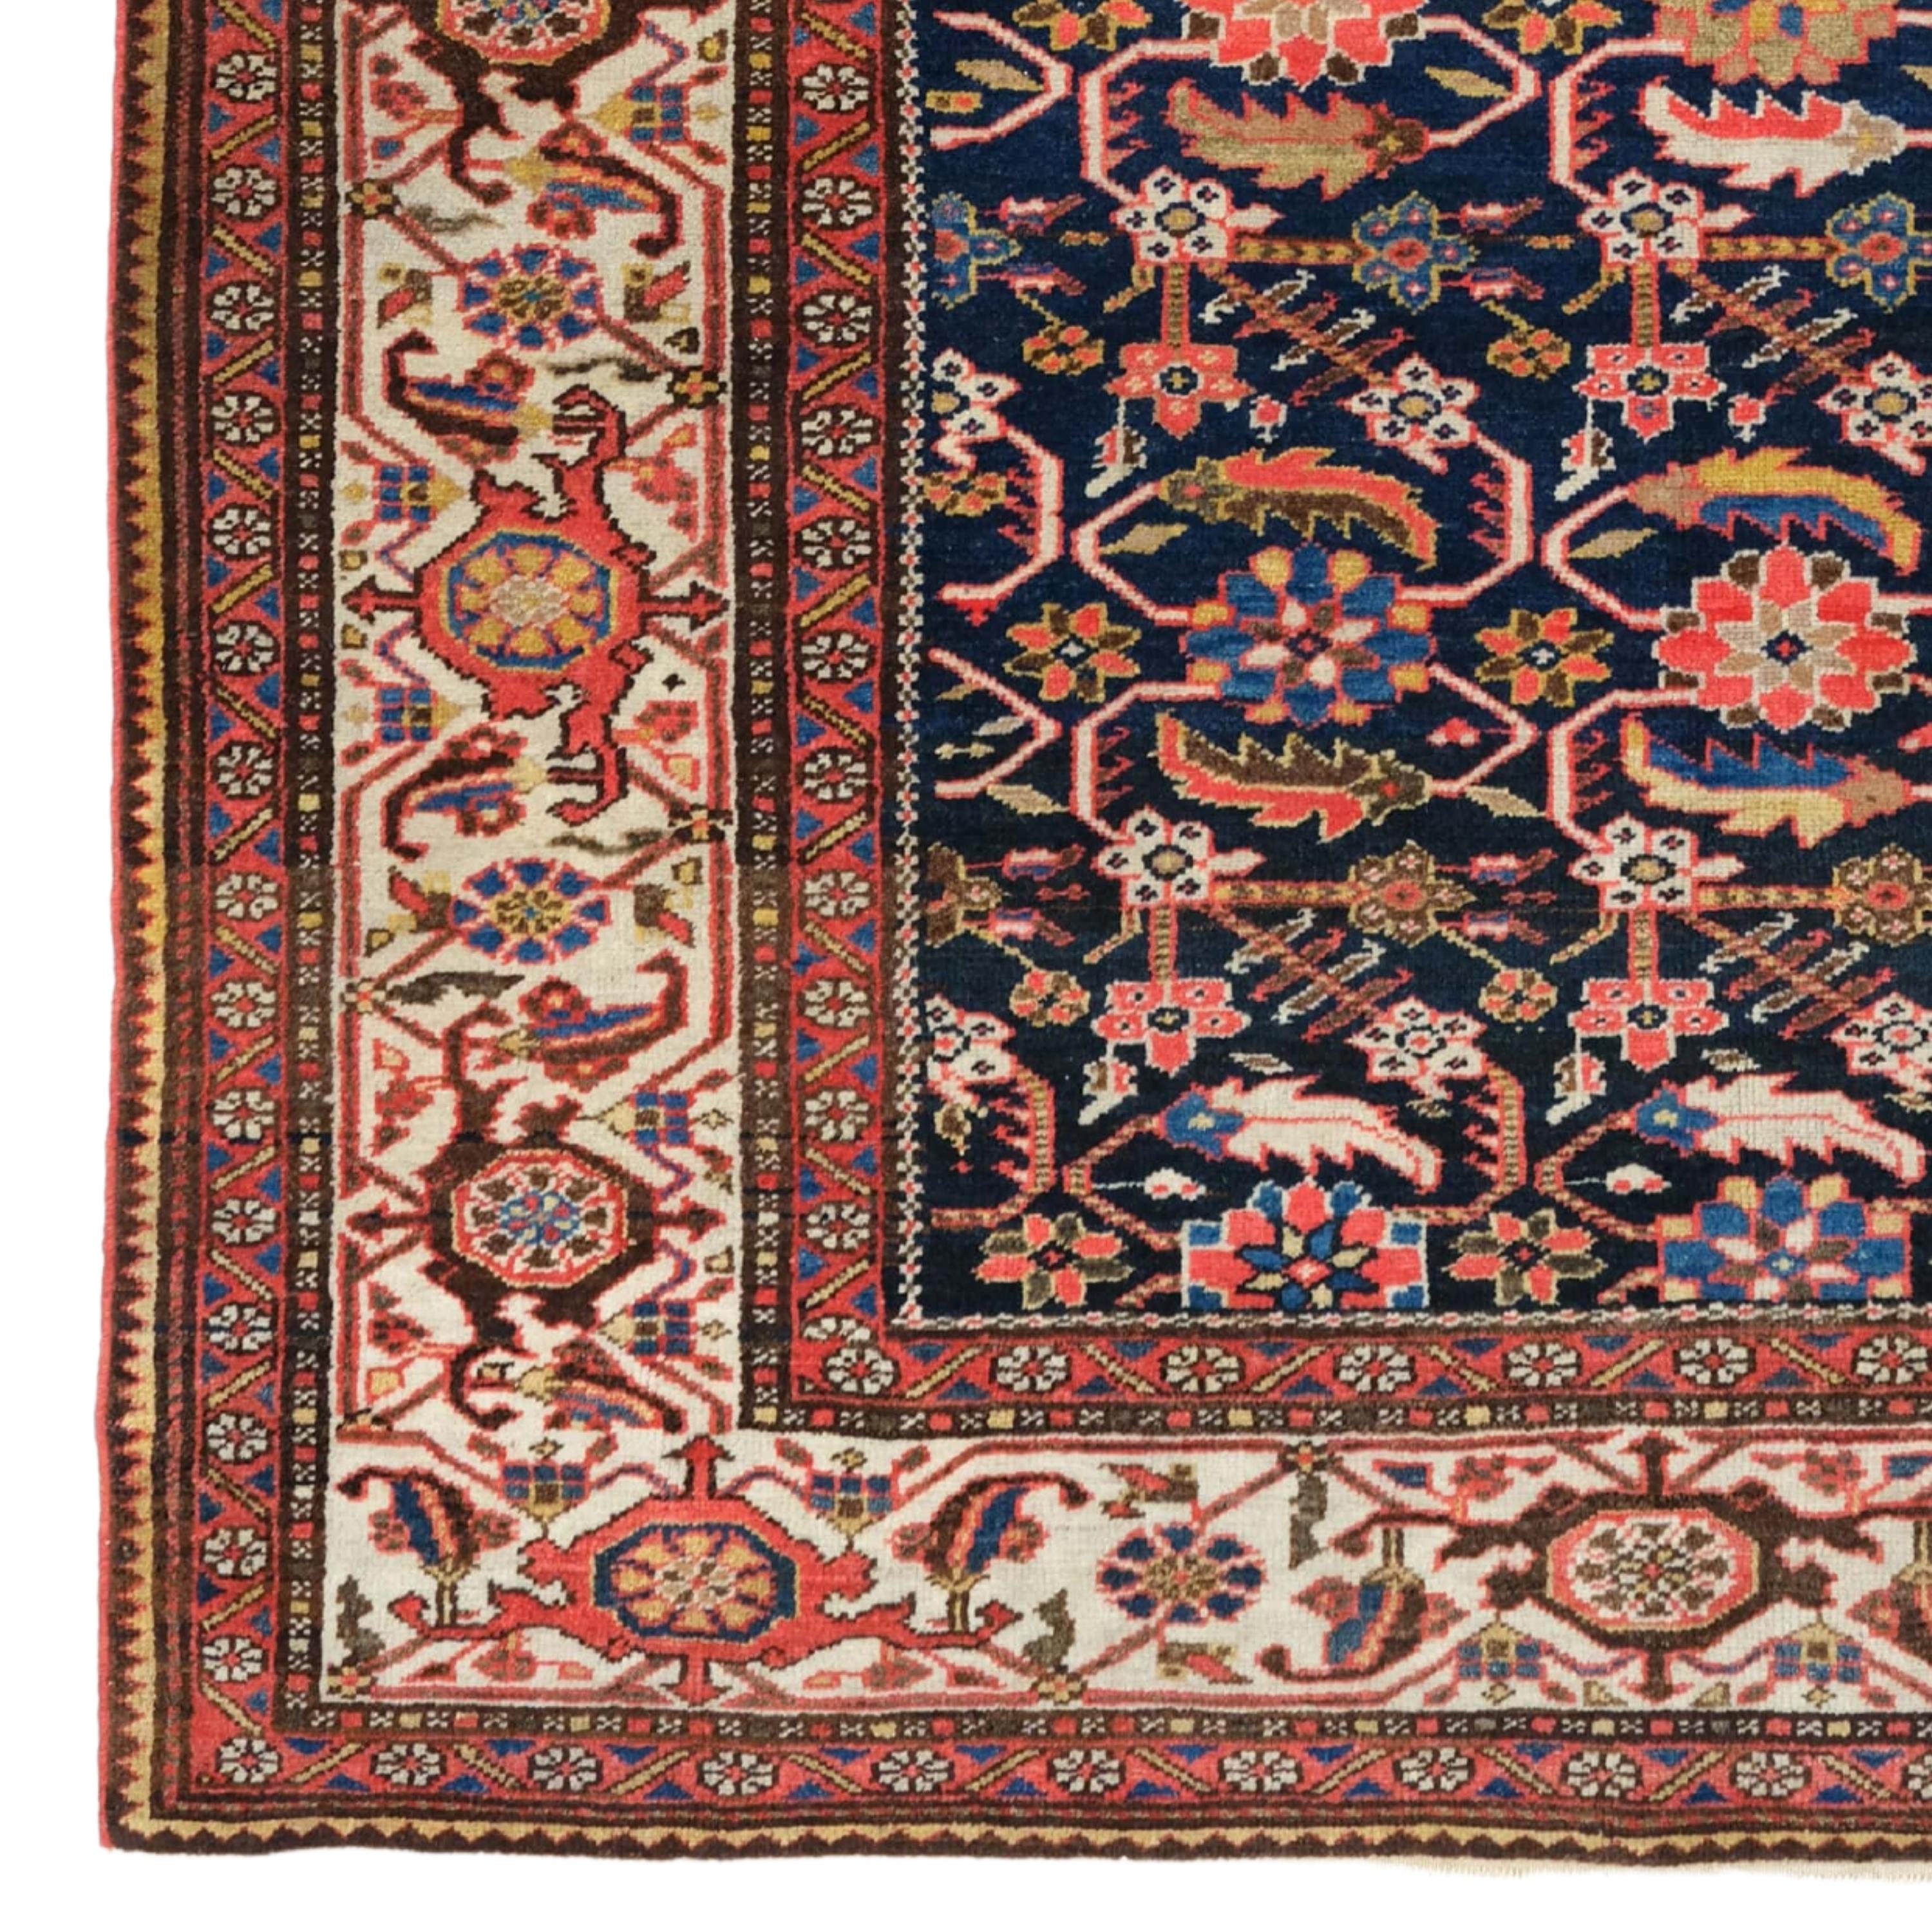 An absolute classical Antique Circa 1880 Malayer rug.

These type of smaller size beautiful rugs have a wonderful style with such simple geometry that makes them excellent decorative pieces so suitable for today’s designs and themes.

This rug is in